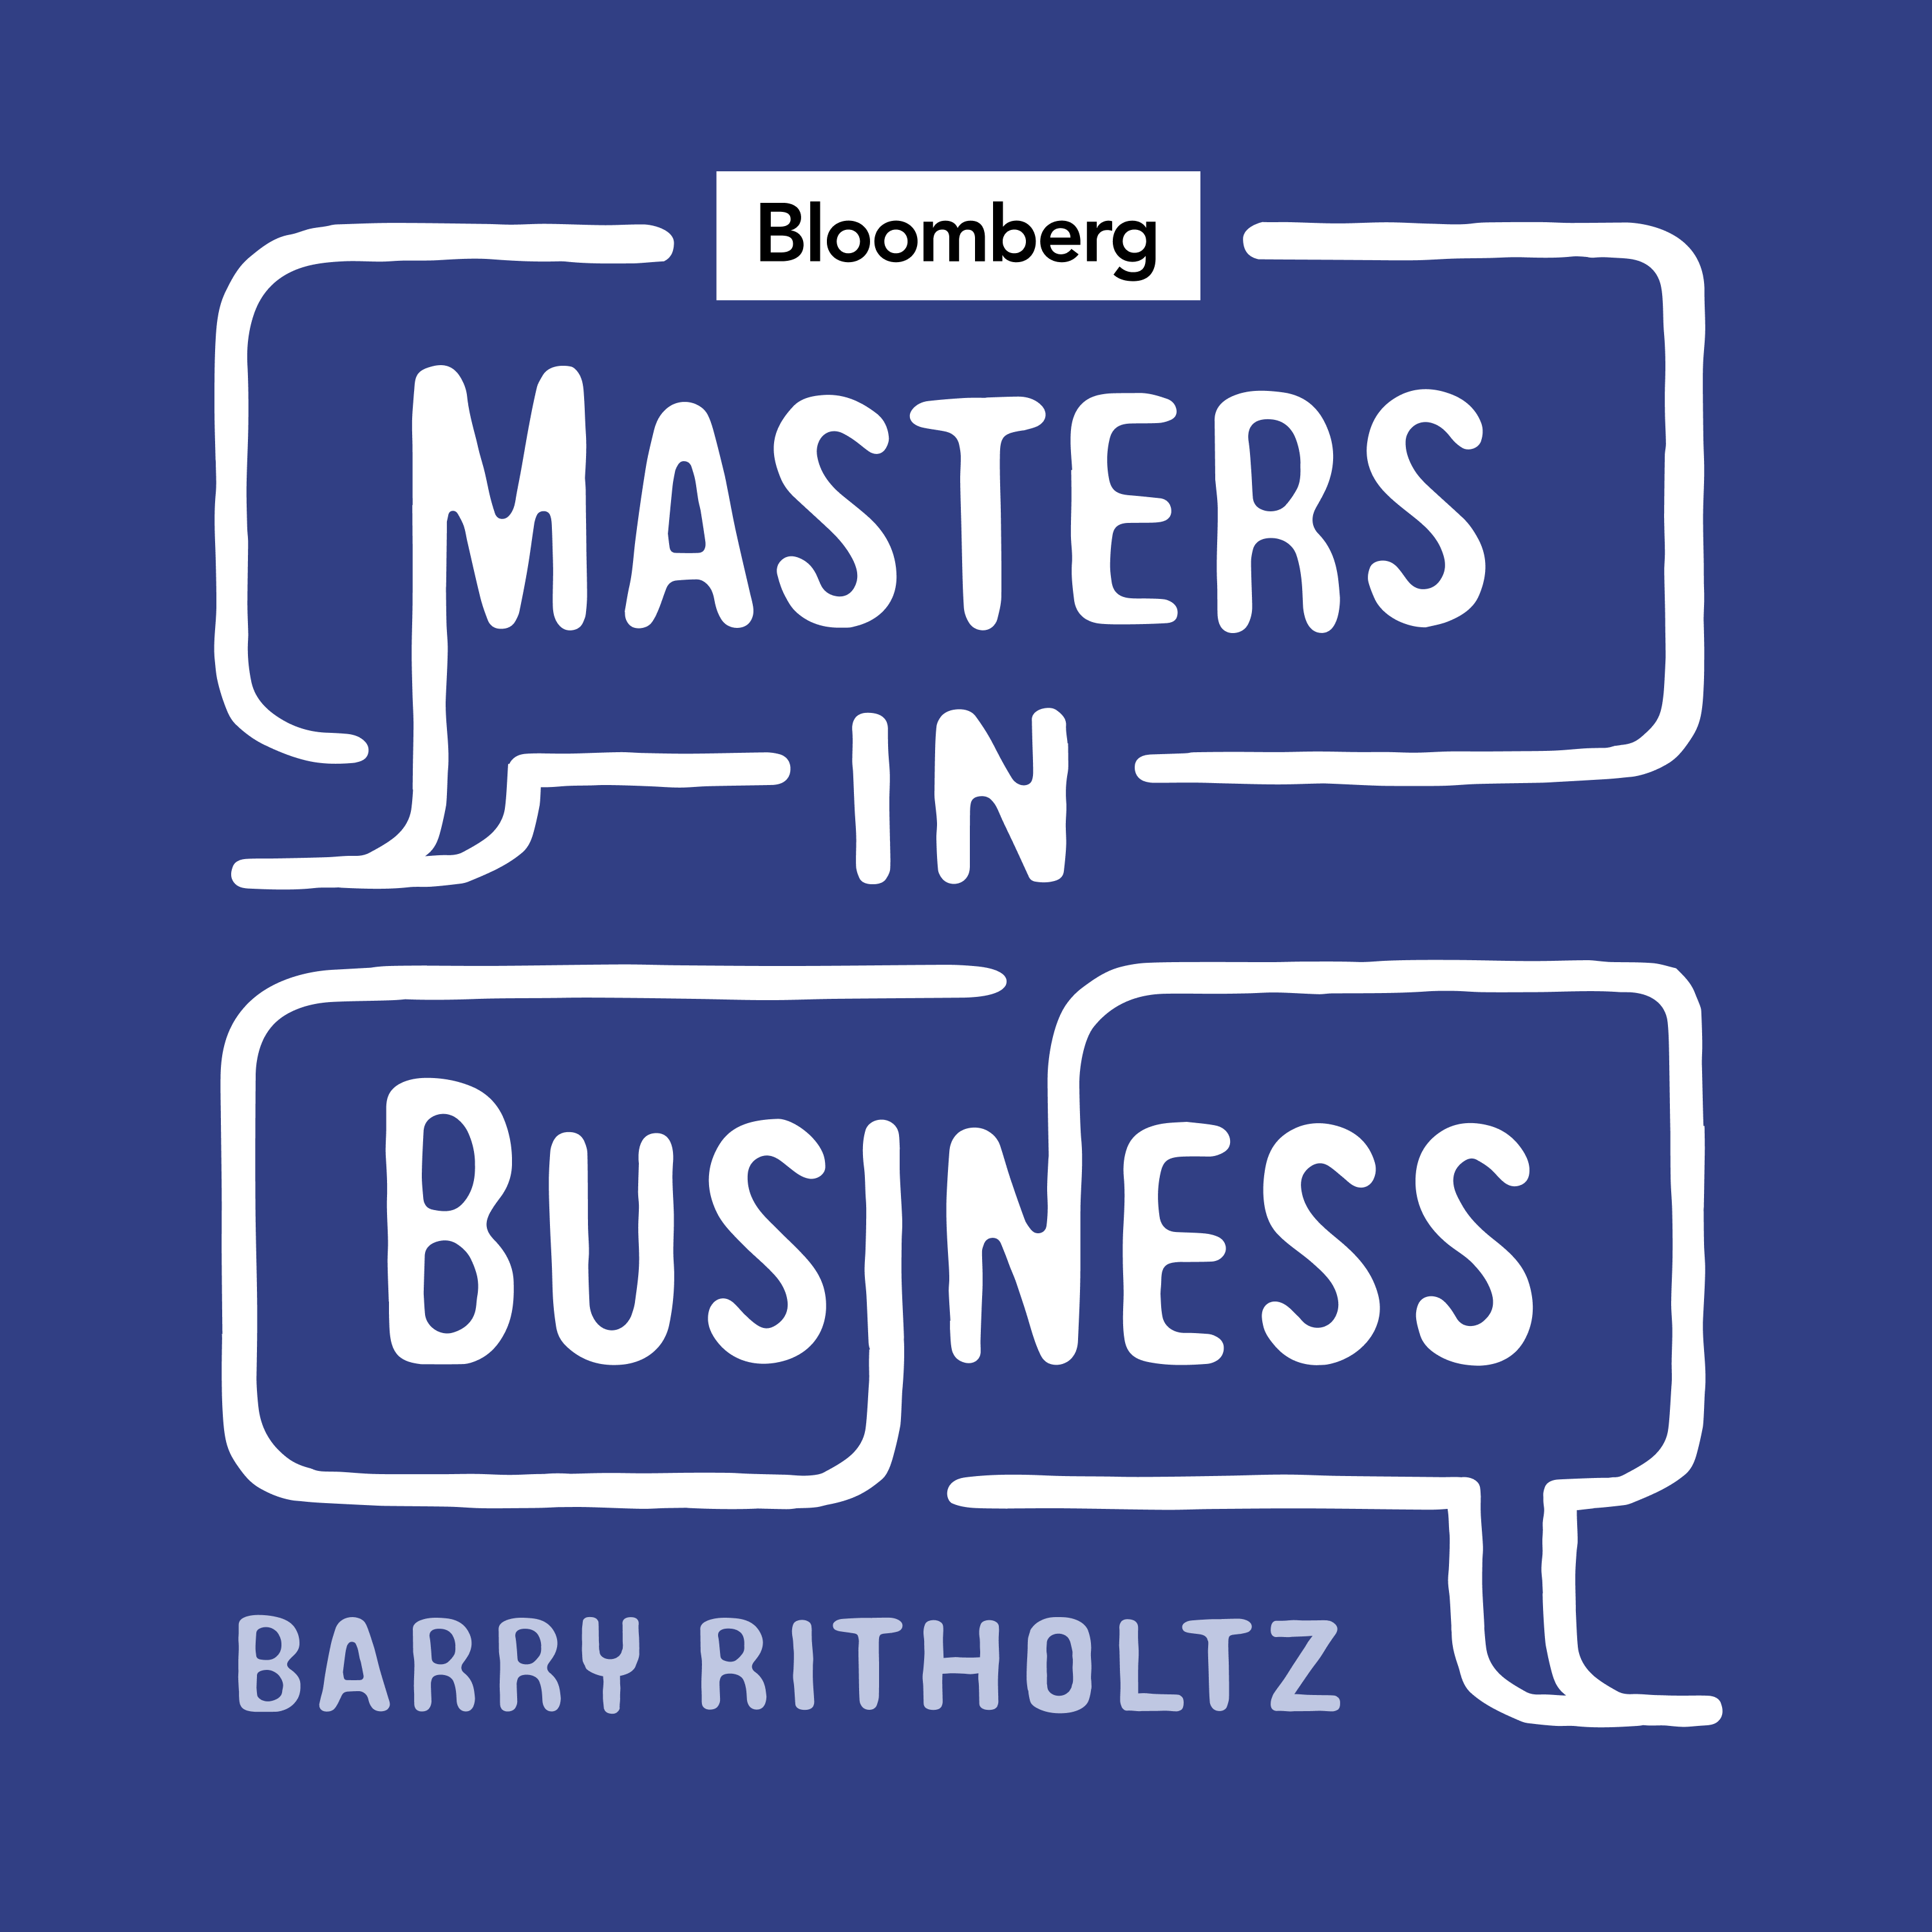 Christine Hurtsellers on the Business of Trust (Podcast)